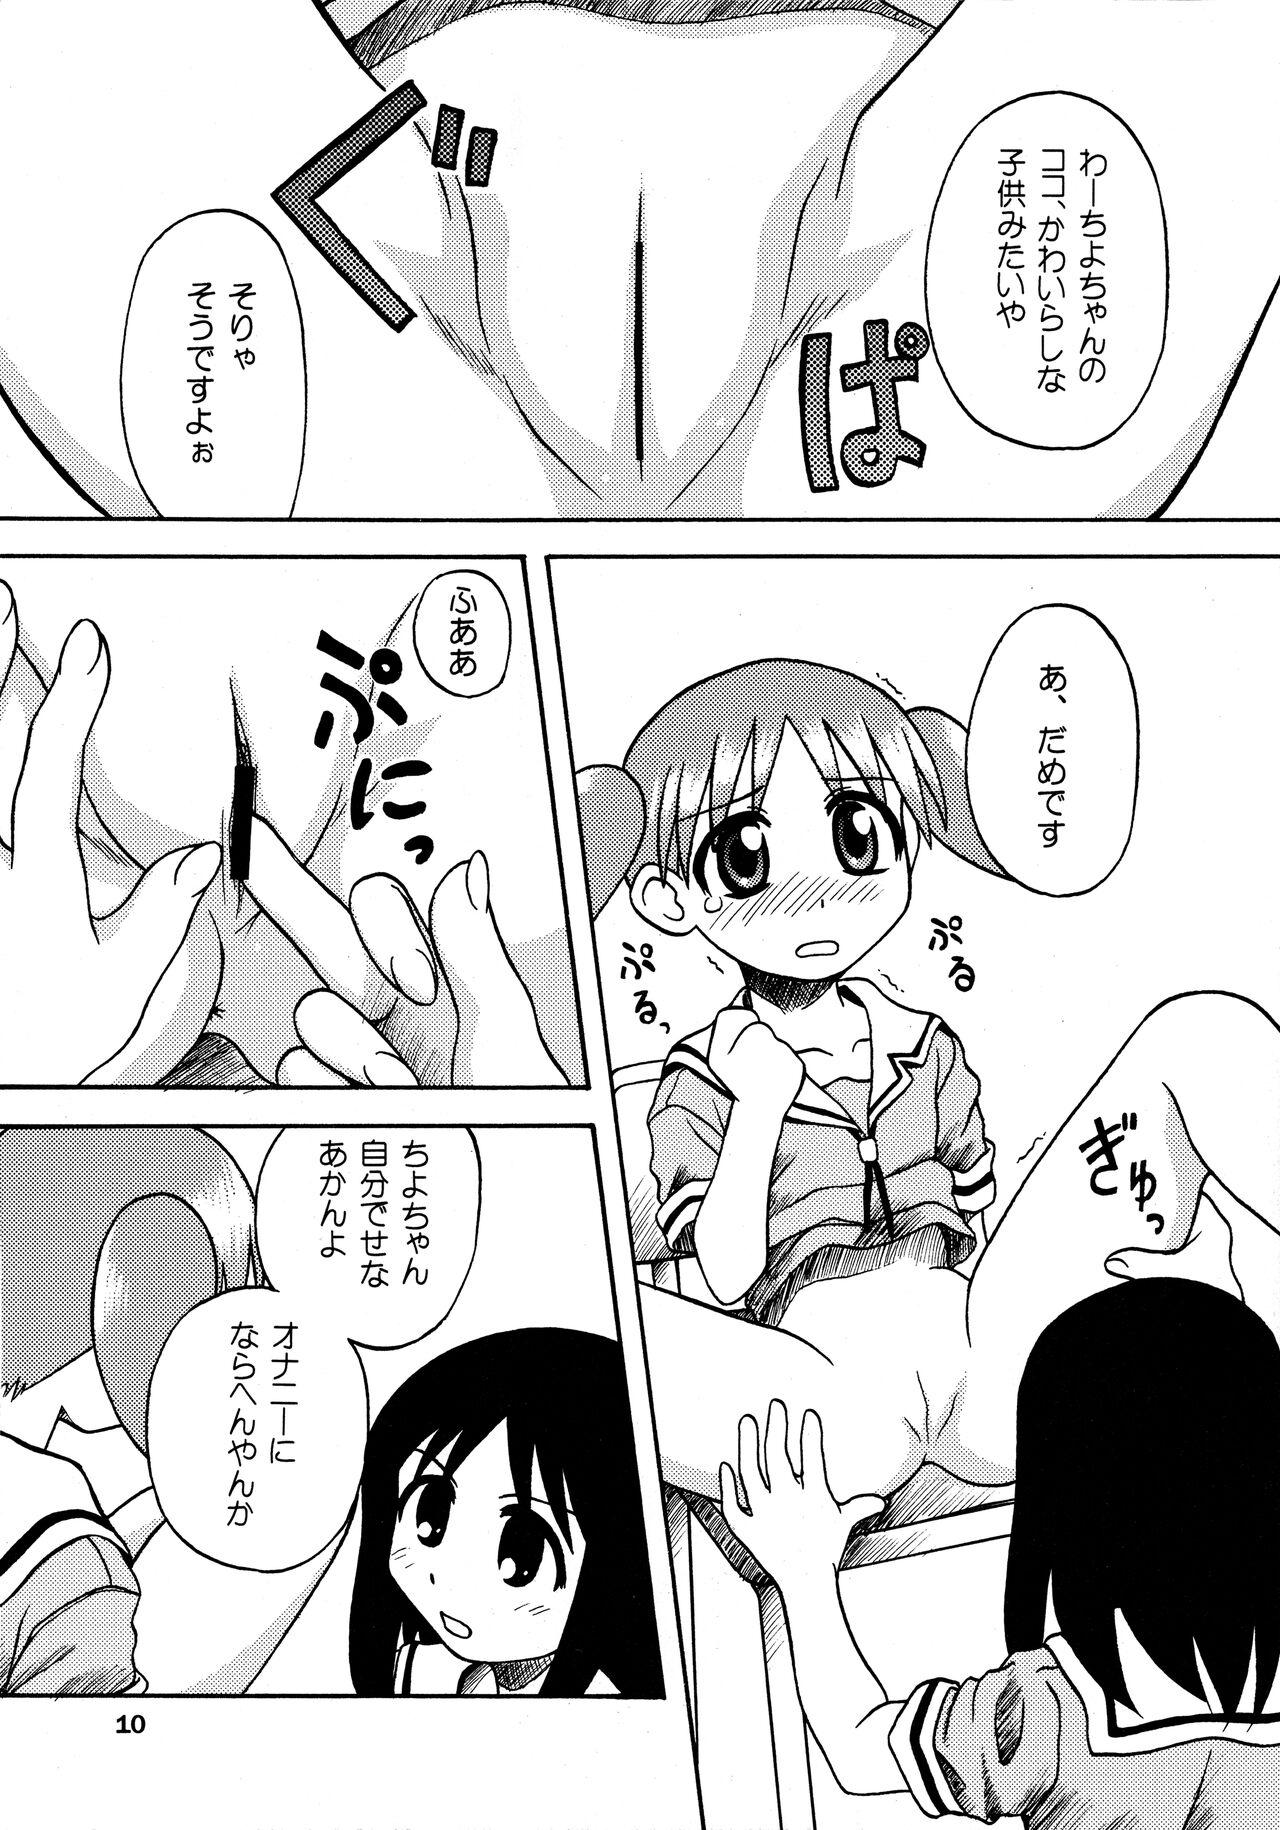 Naked ANOTHER LIFE - Azumanga daioh Perfect Body Porn - Page 10